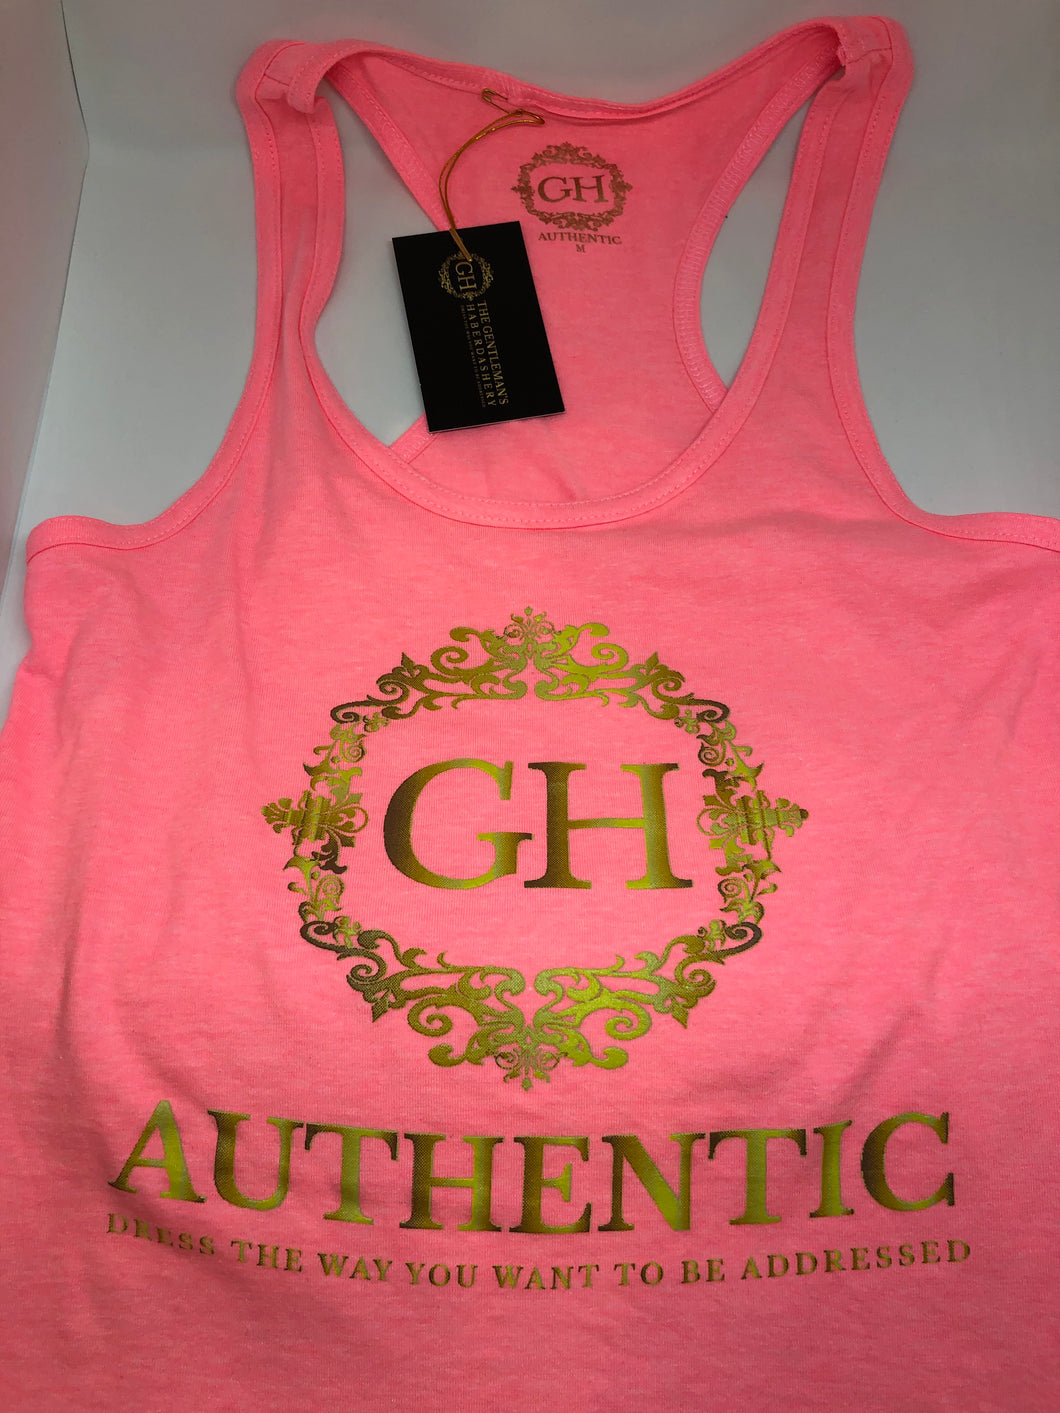 GH Authentic Women's Pink Tank Top